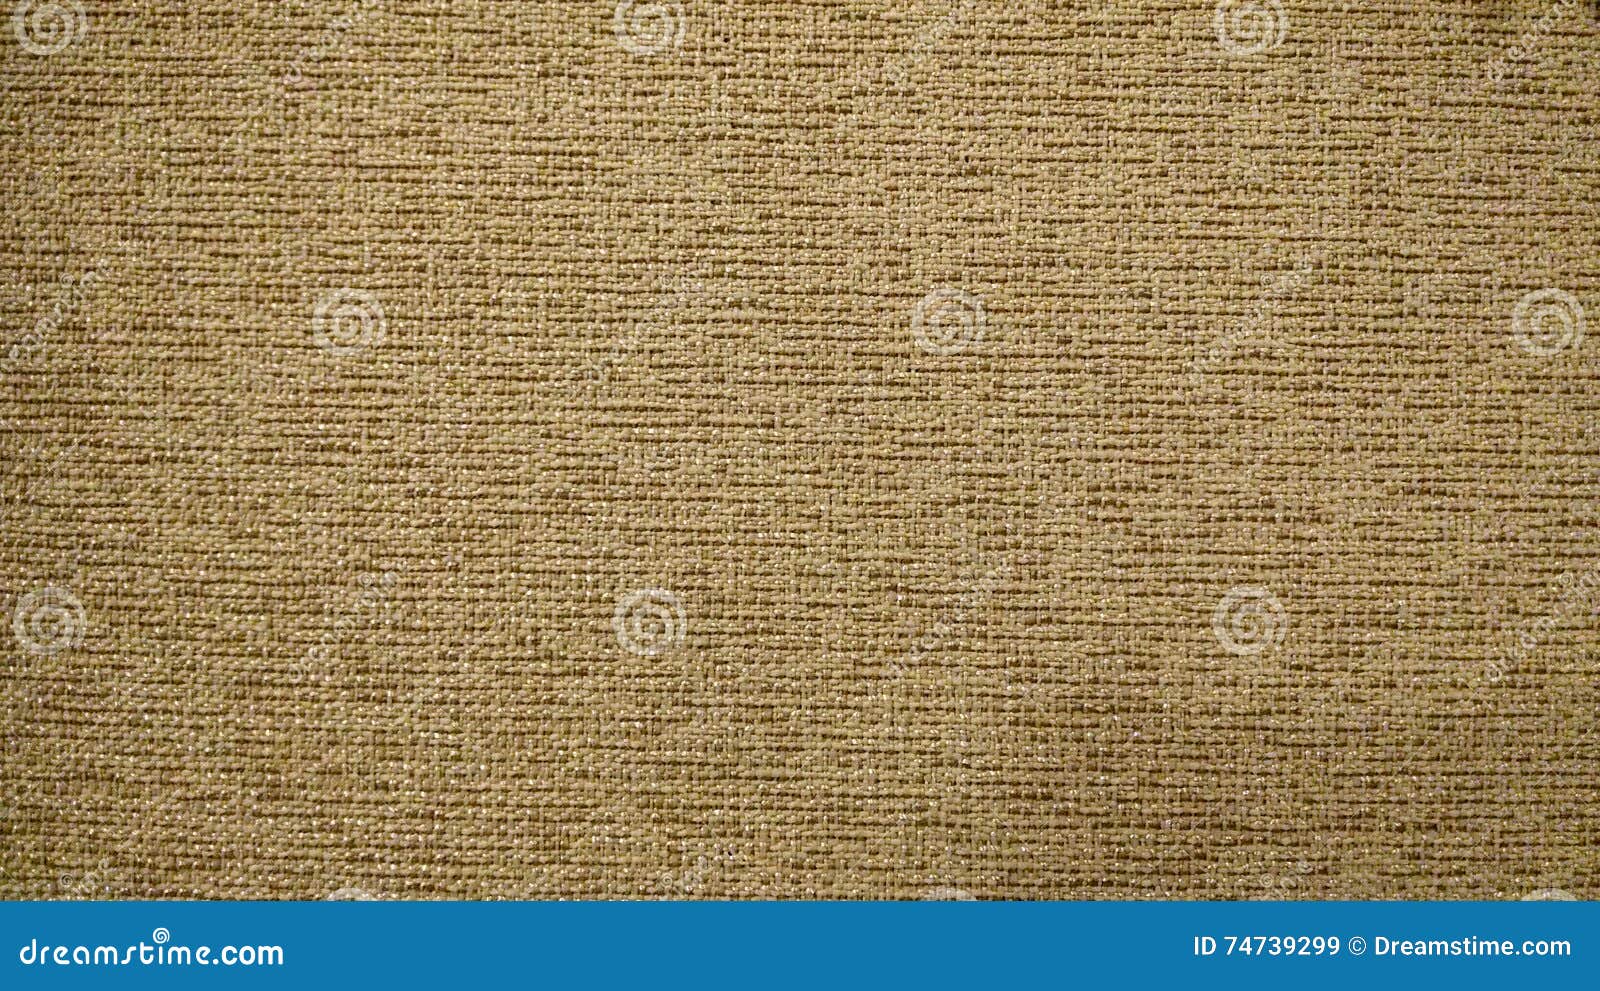 yellow-brown background